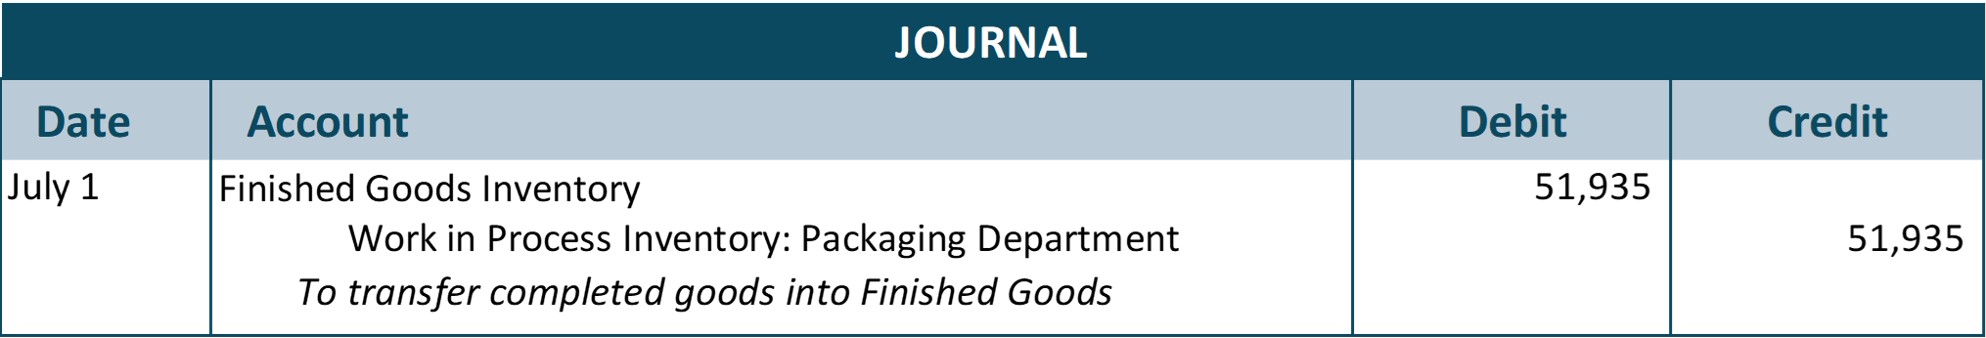 Journal entry for July 1 debiting Finished Goods Inventory and crediting Work in Process Inventory: Packaging Department for $51,935. Explanation: To transfer completed goods into Finished Goods.